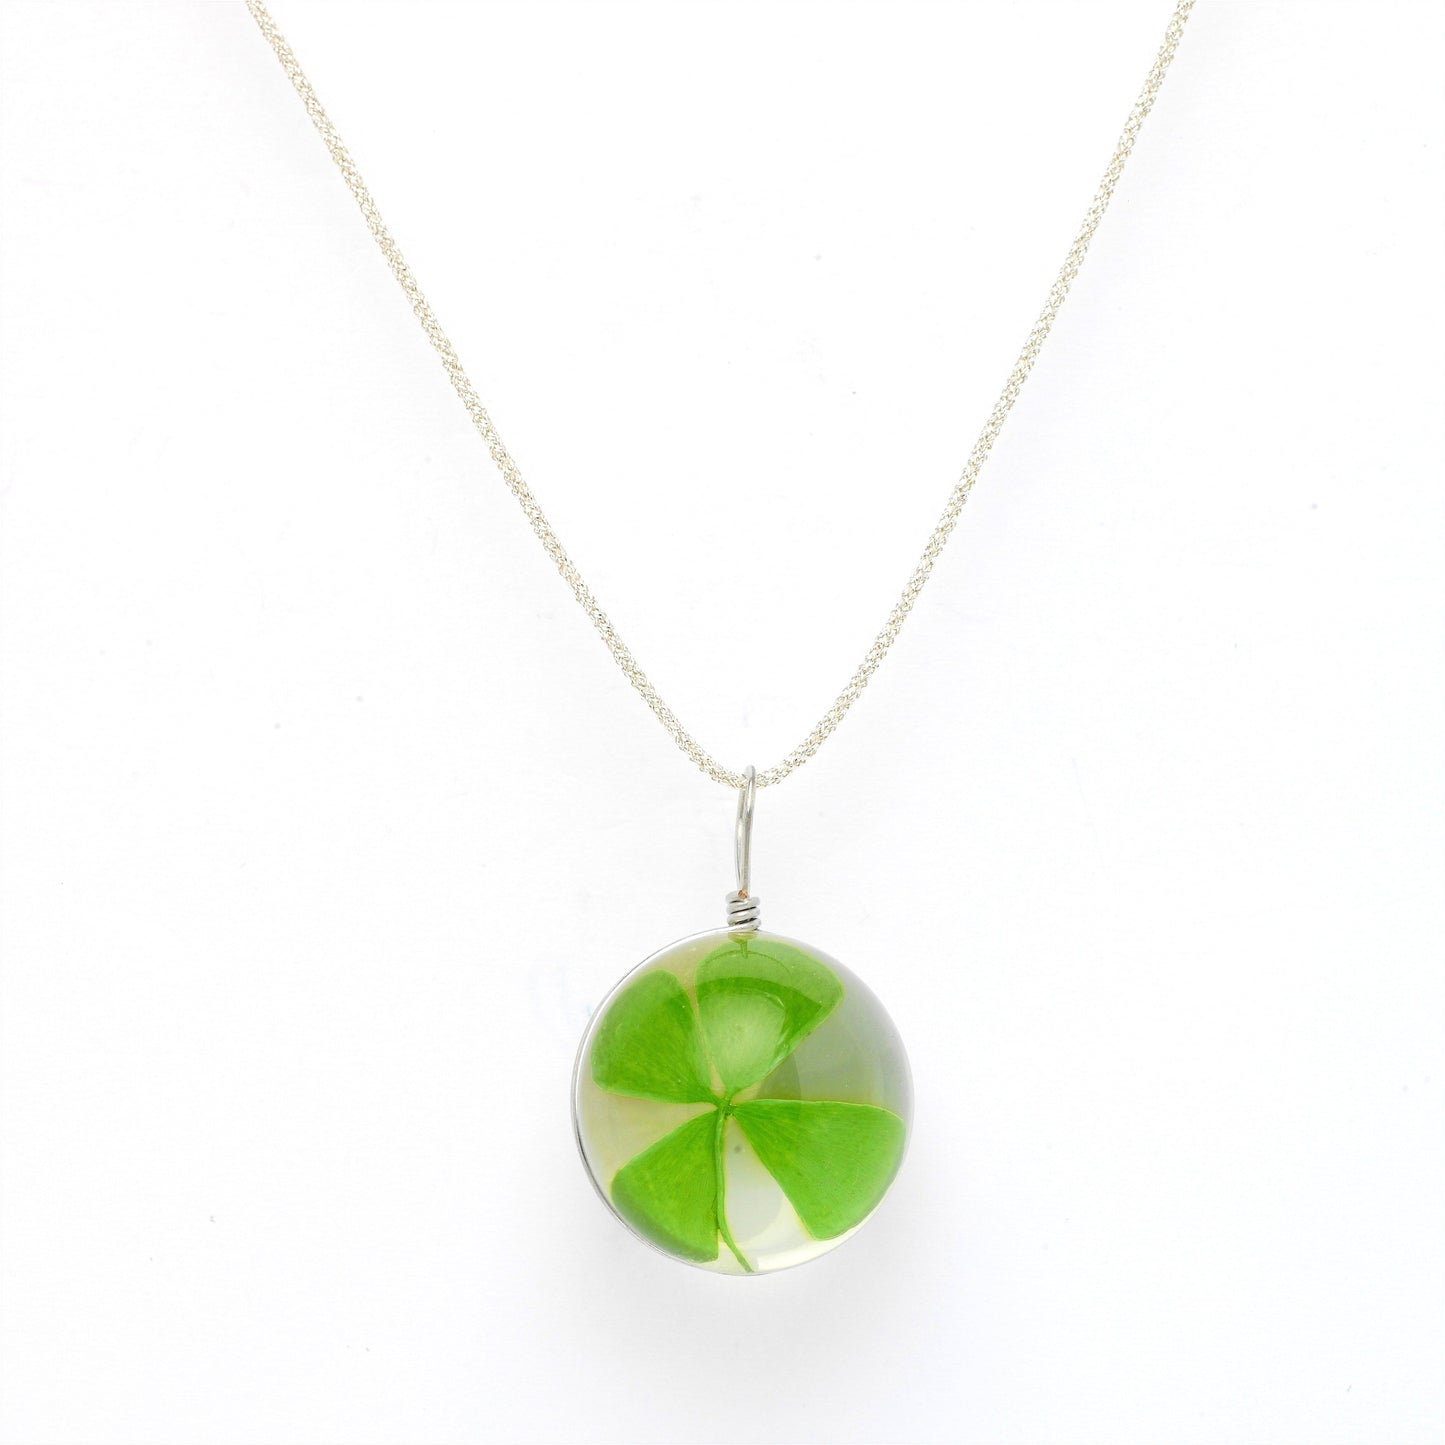 Good Luck Charm Necklace